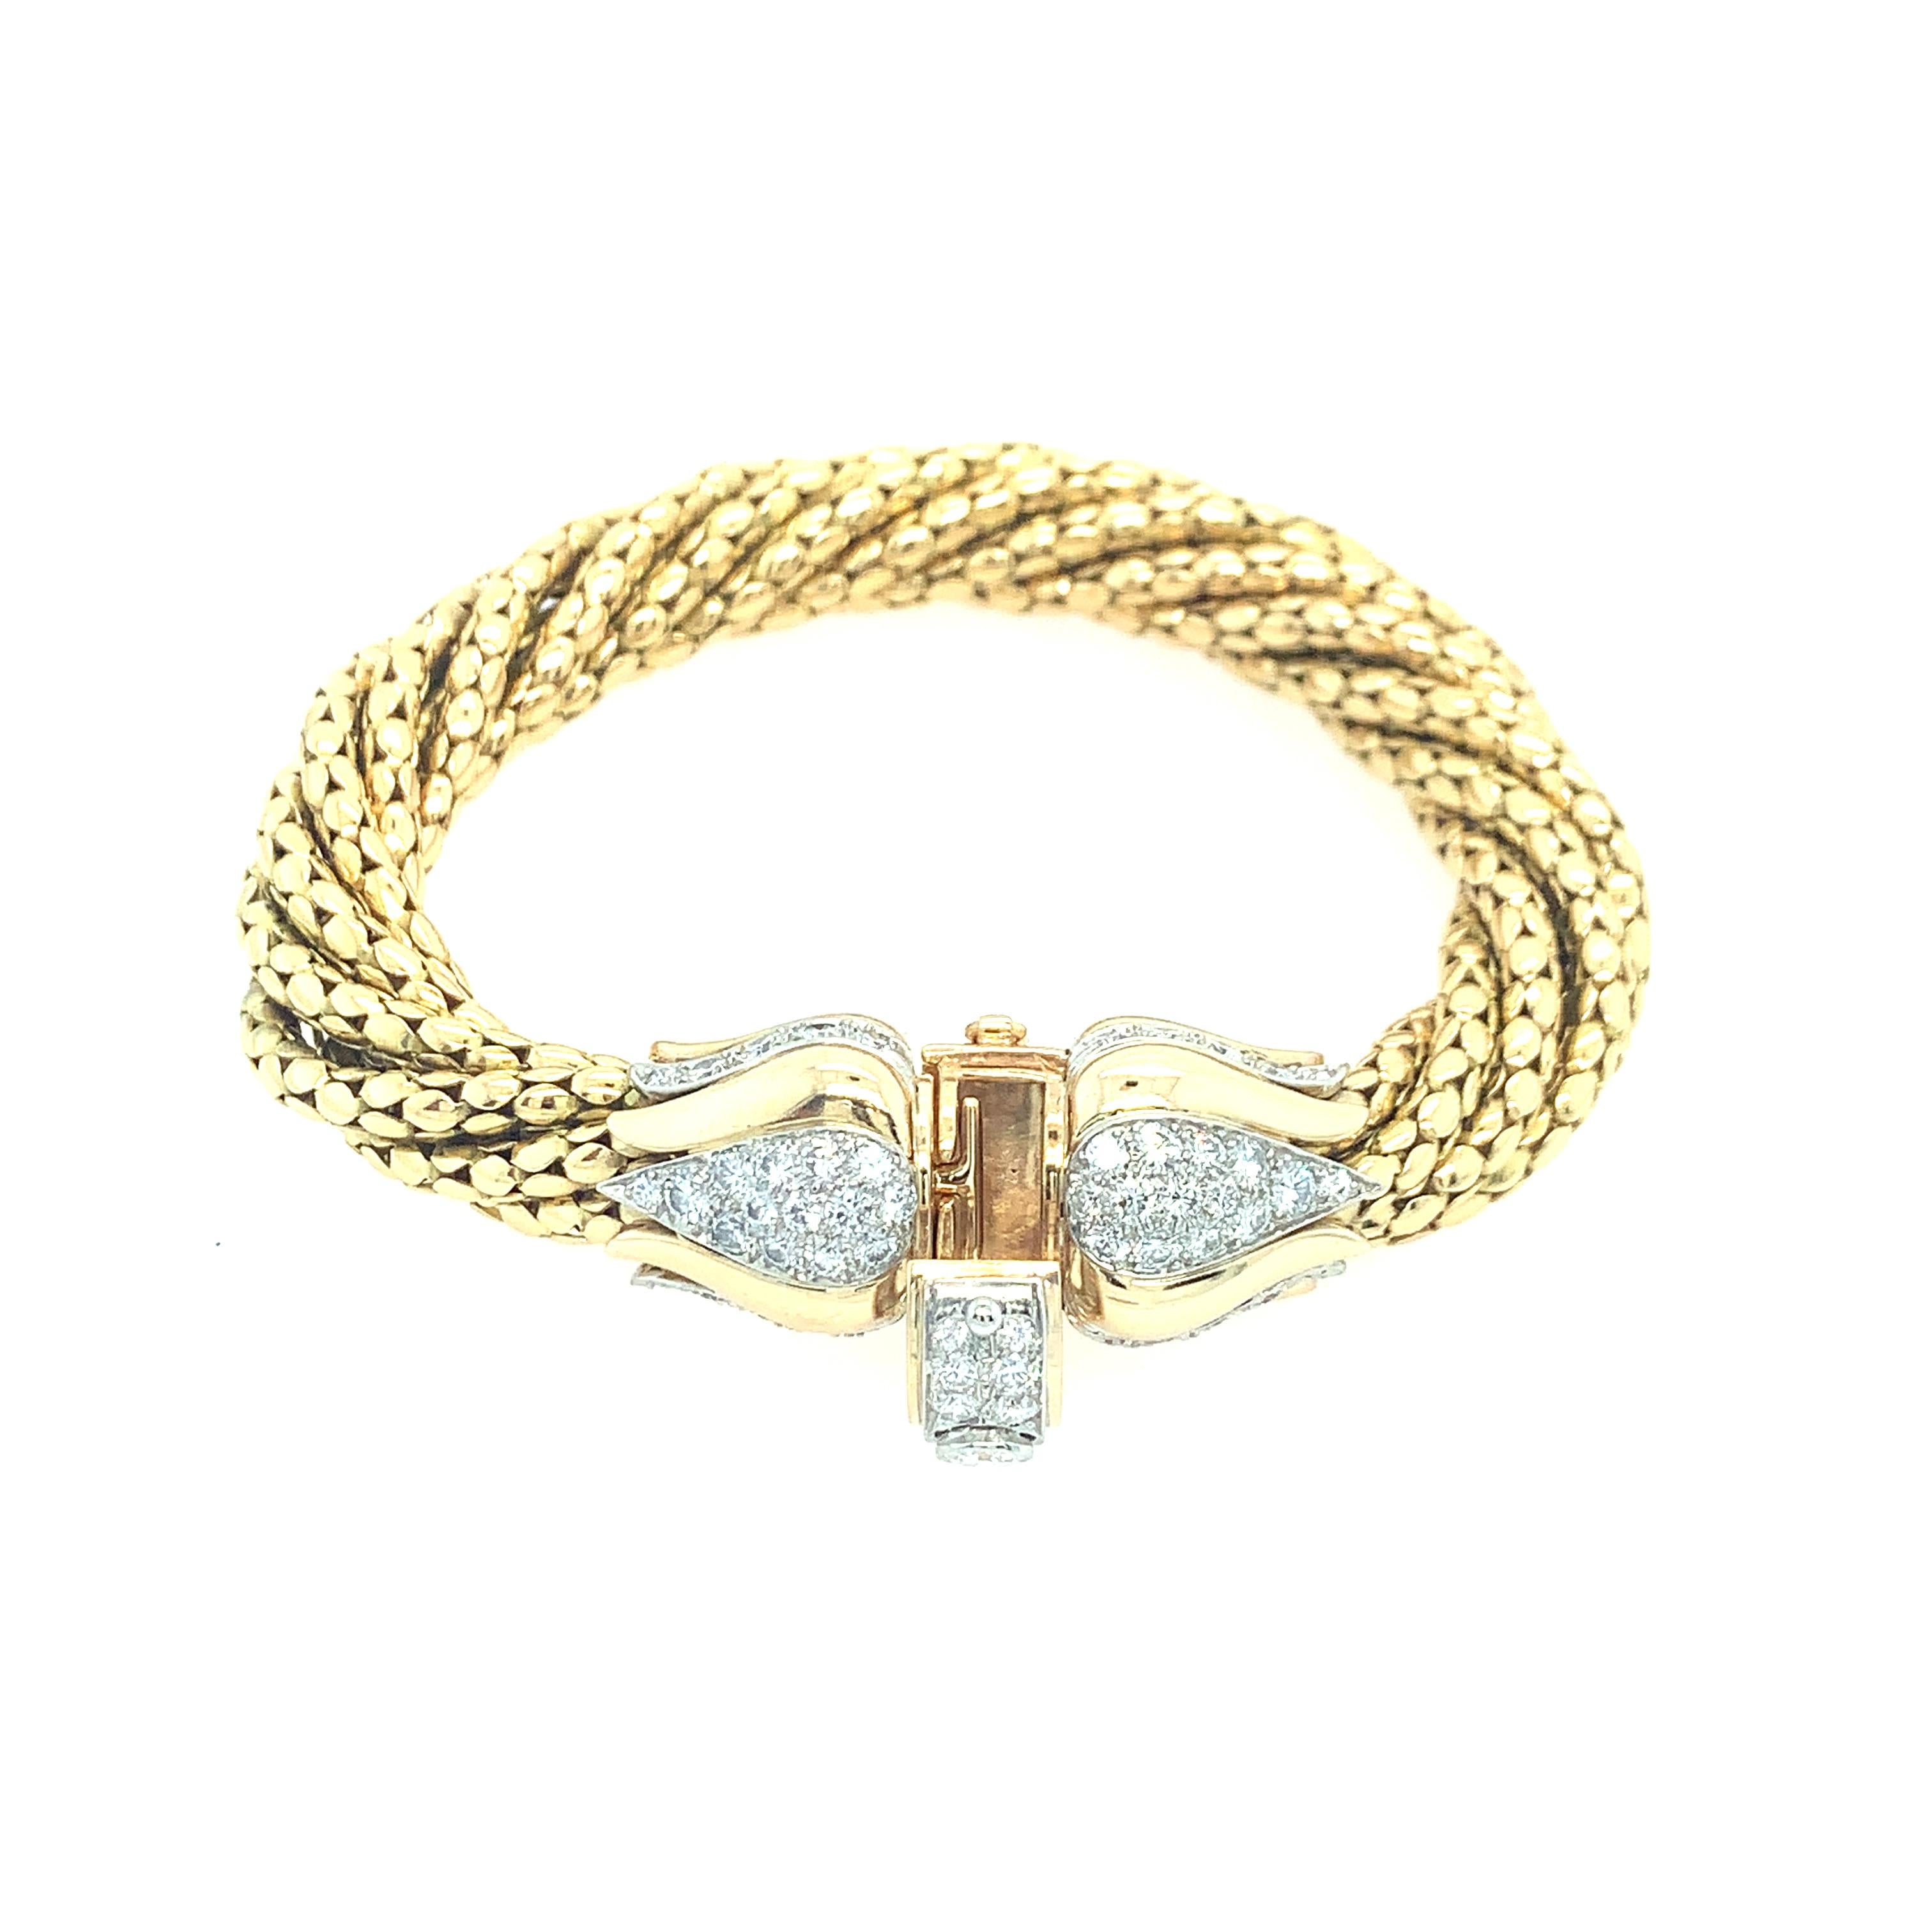 A classic 18K yellow gold exceptional piece featuring (7) seven link chains intertwined creating a sophisticated multirow bracelet. Twisted gold wraps elegantly around the wrist, maintaining a solid weight, yet comfortable for everyday wear. At each